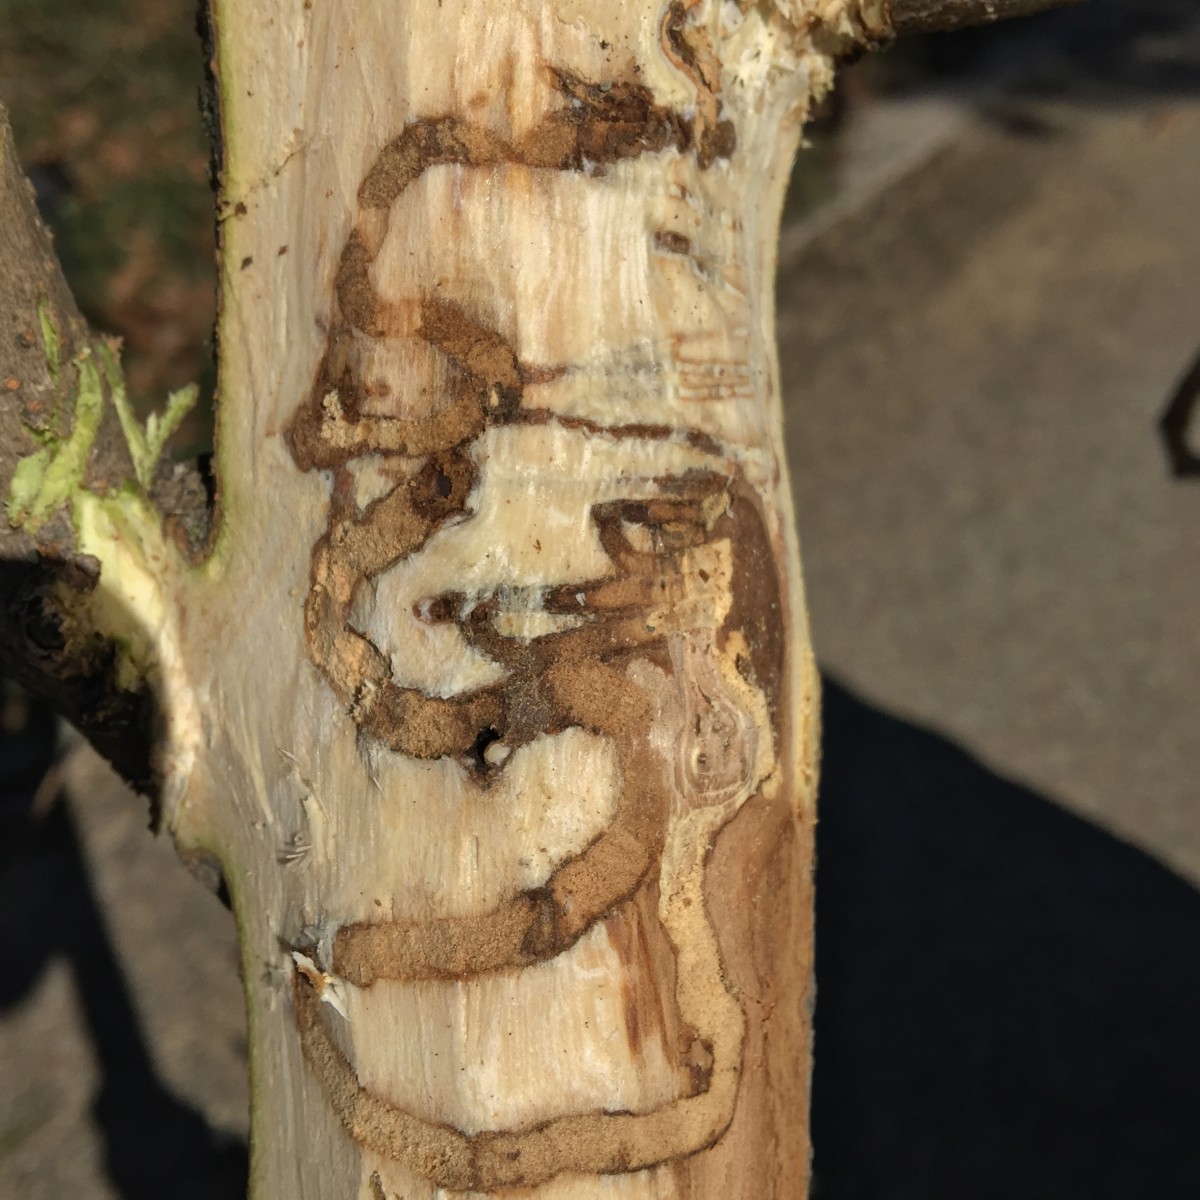 PHOTO: The gallery left under the fringetree’s bark by emerald ash borer activity.